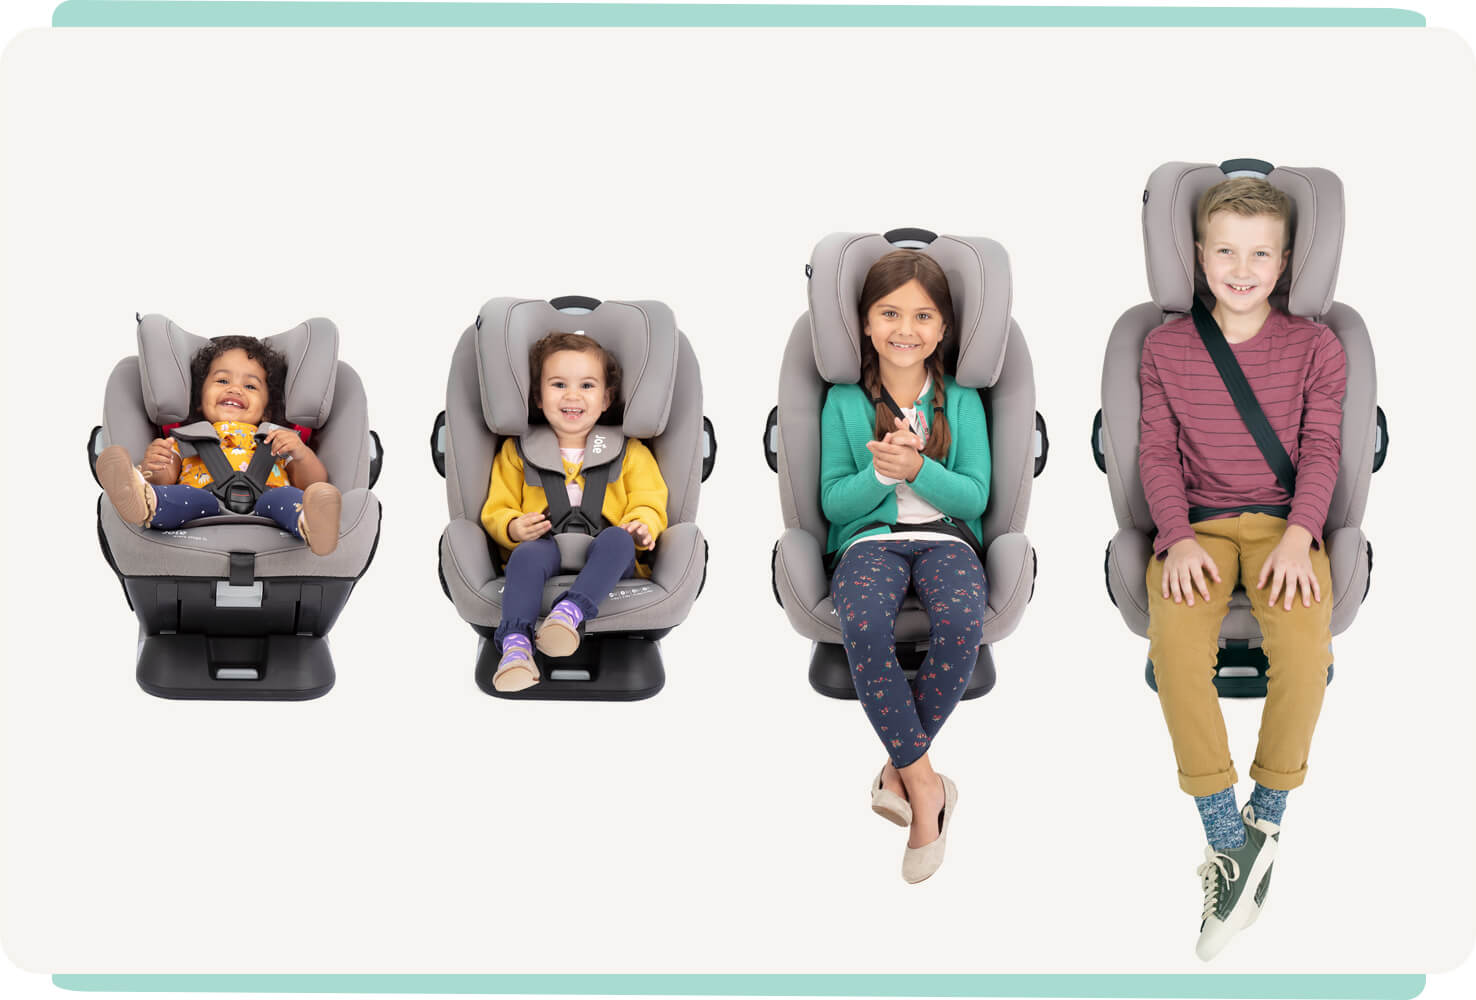  4 children of different ages sitting side by side in gray Joie Every Stage FX car seats: from left to right a baby, young toddler, young child, and older child.